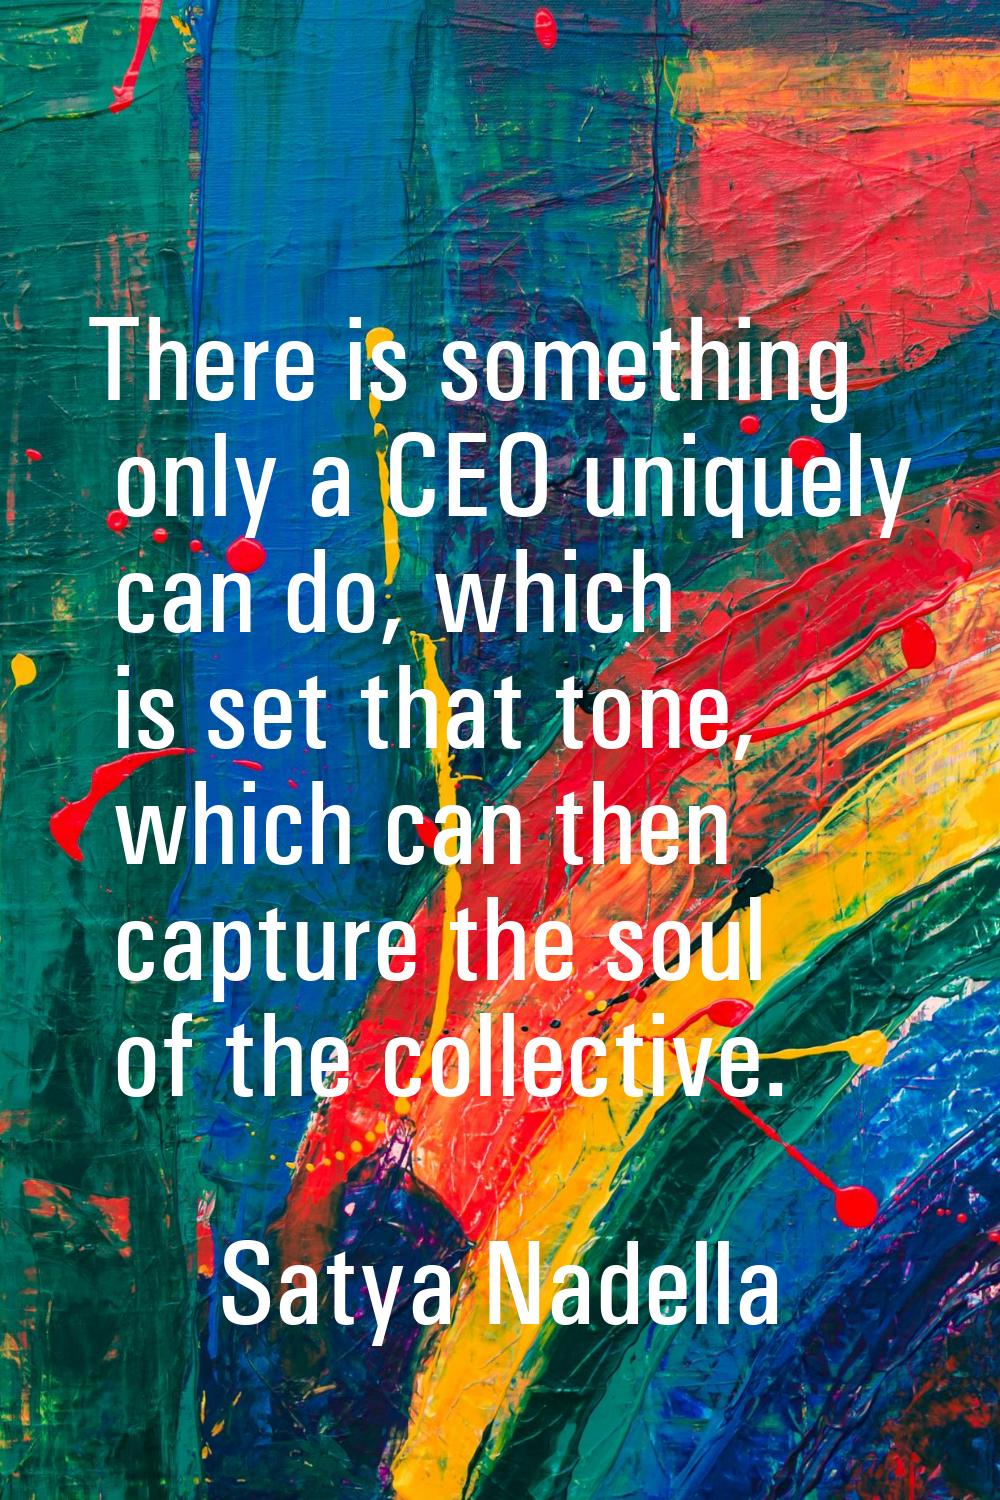 There is something only a CEO uniquely can do, which is set that tone, which can then capture the s